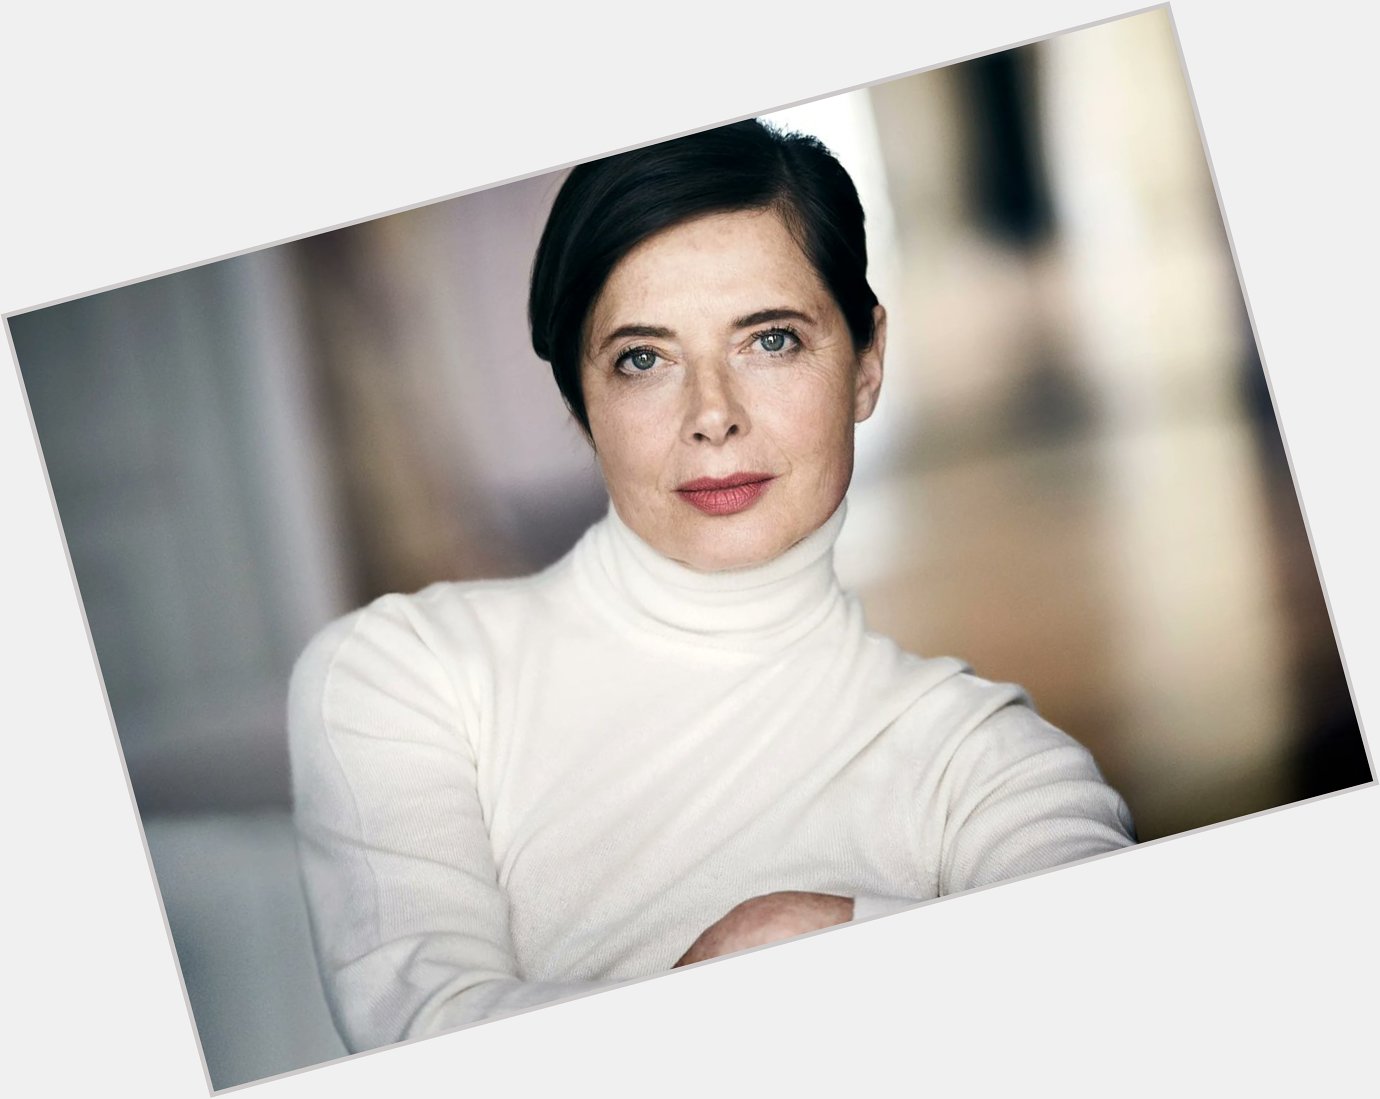 Happy Birthday Wishes going out to Isabella Rossellini 